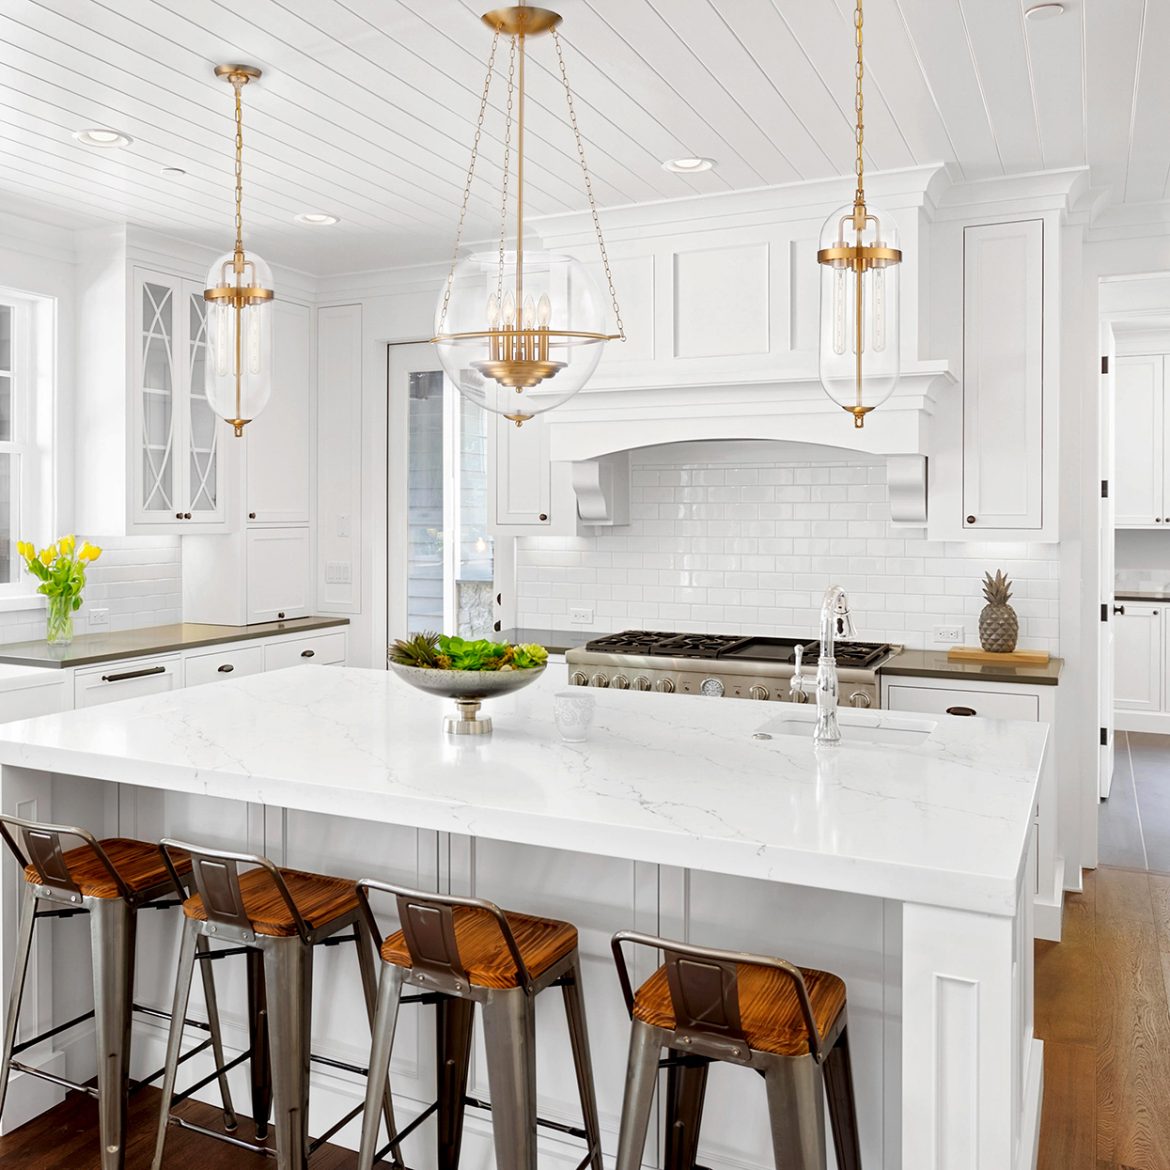 Stylish and Functional: Square LED Kitchen Ceiling Lights Illuminate Your Space